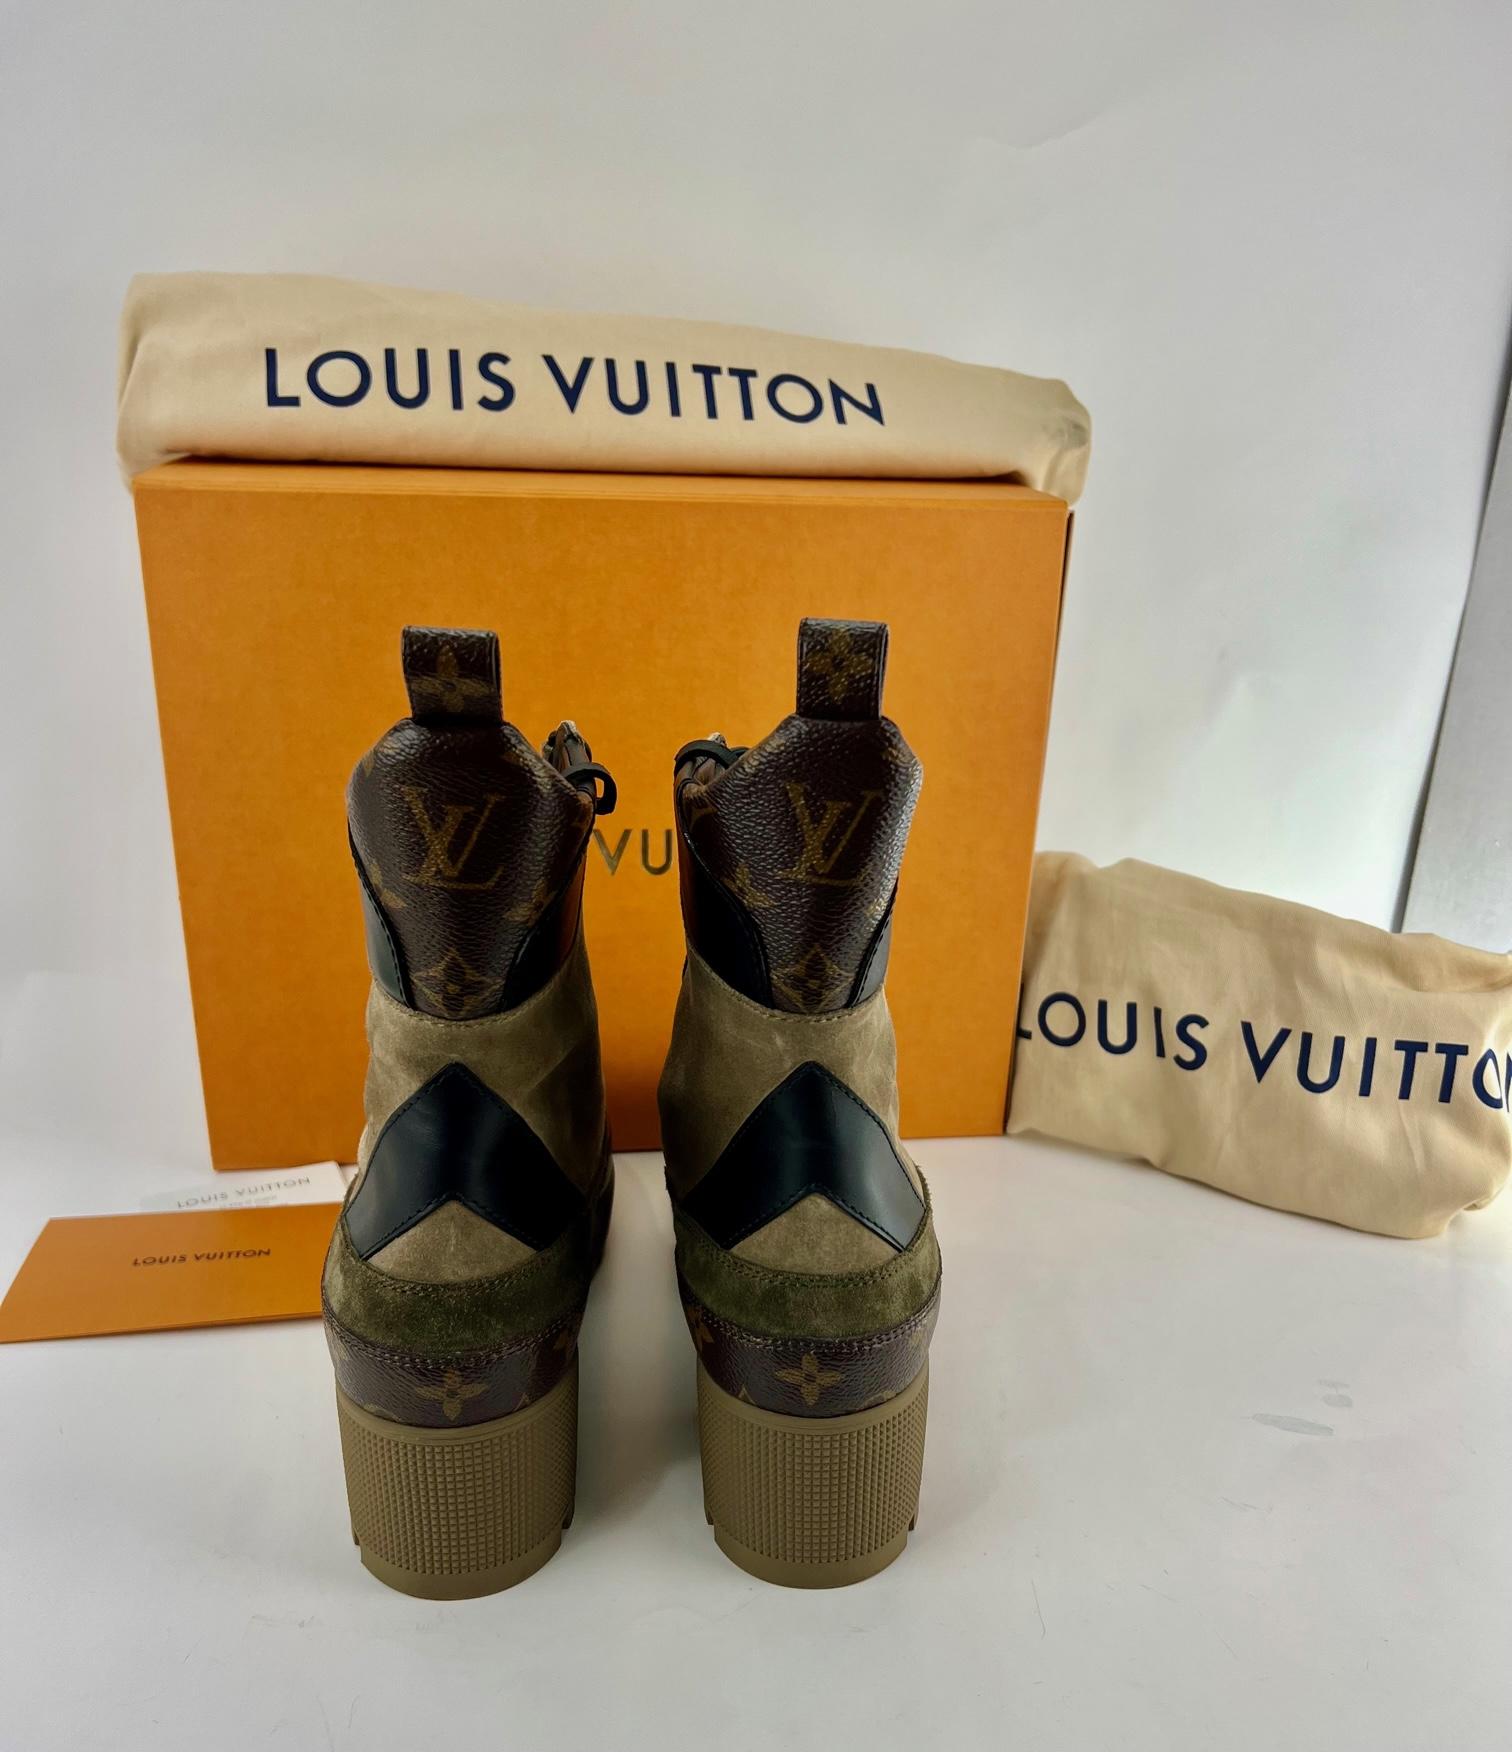 Preowned 100% AUTHENTIC
LOUIS VUITTON LAUREATE Platform
Beige Desert Boot
CONDITION: Excellent 
DATE CODE: MA0271 Made in Italy
MATERIAL: suede calf leather, patent Monogram canvas
COLOR: brown, black, khaki, tan
OUTSOLE: rubber
SIZE: 41 USA 11
FOOT